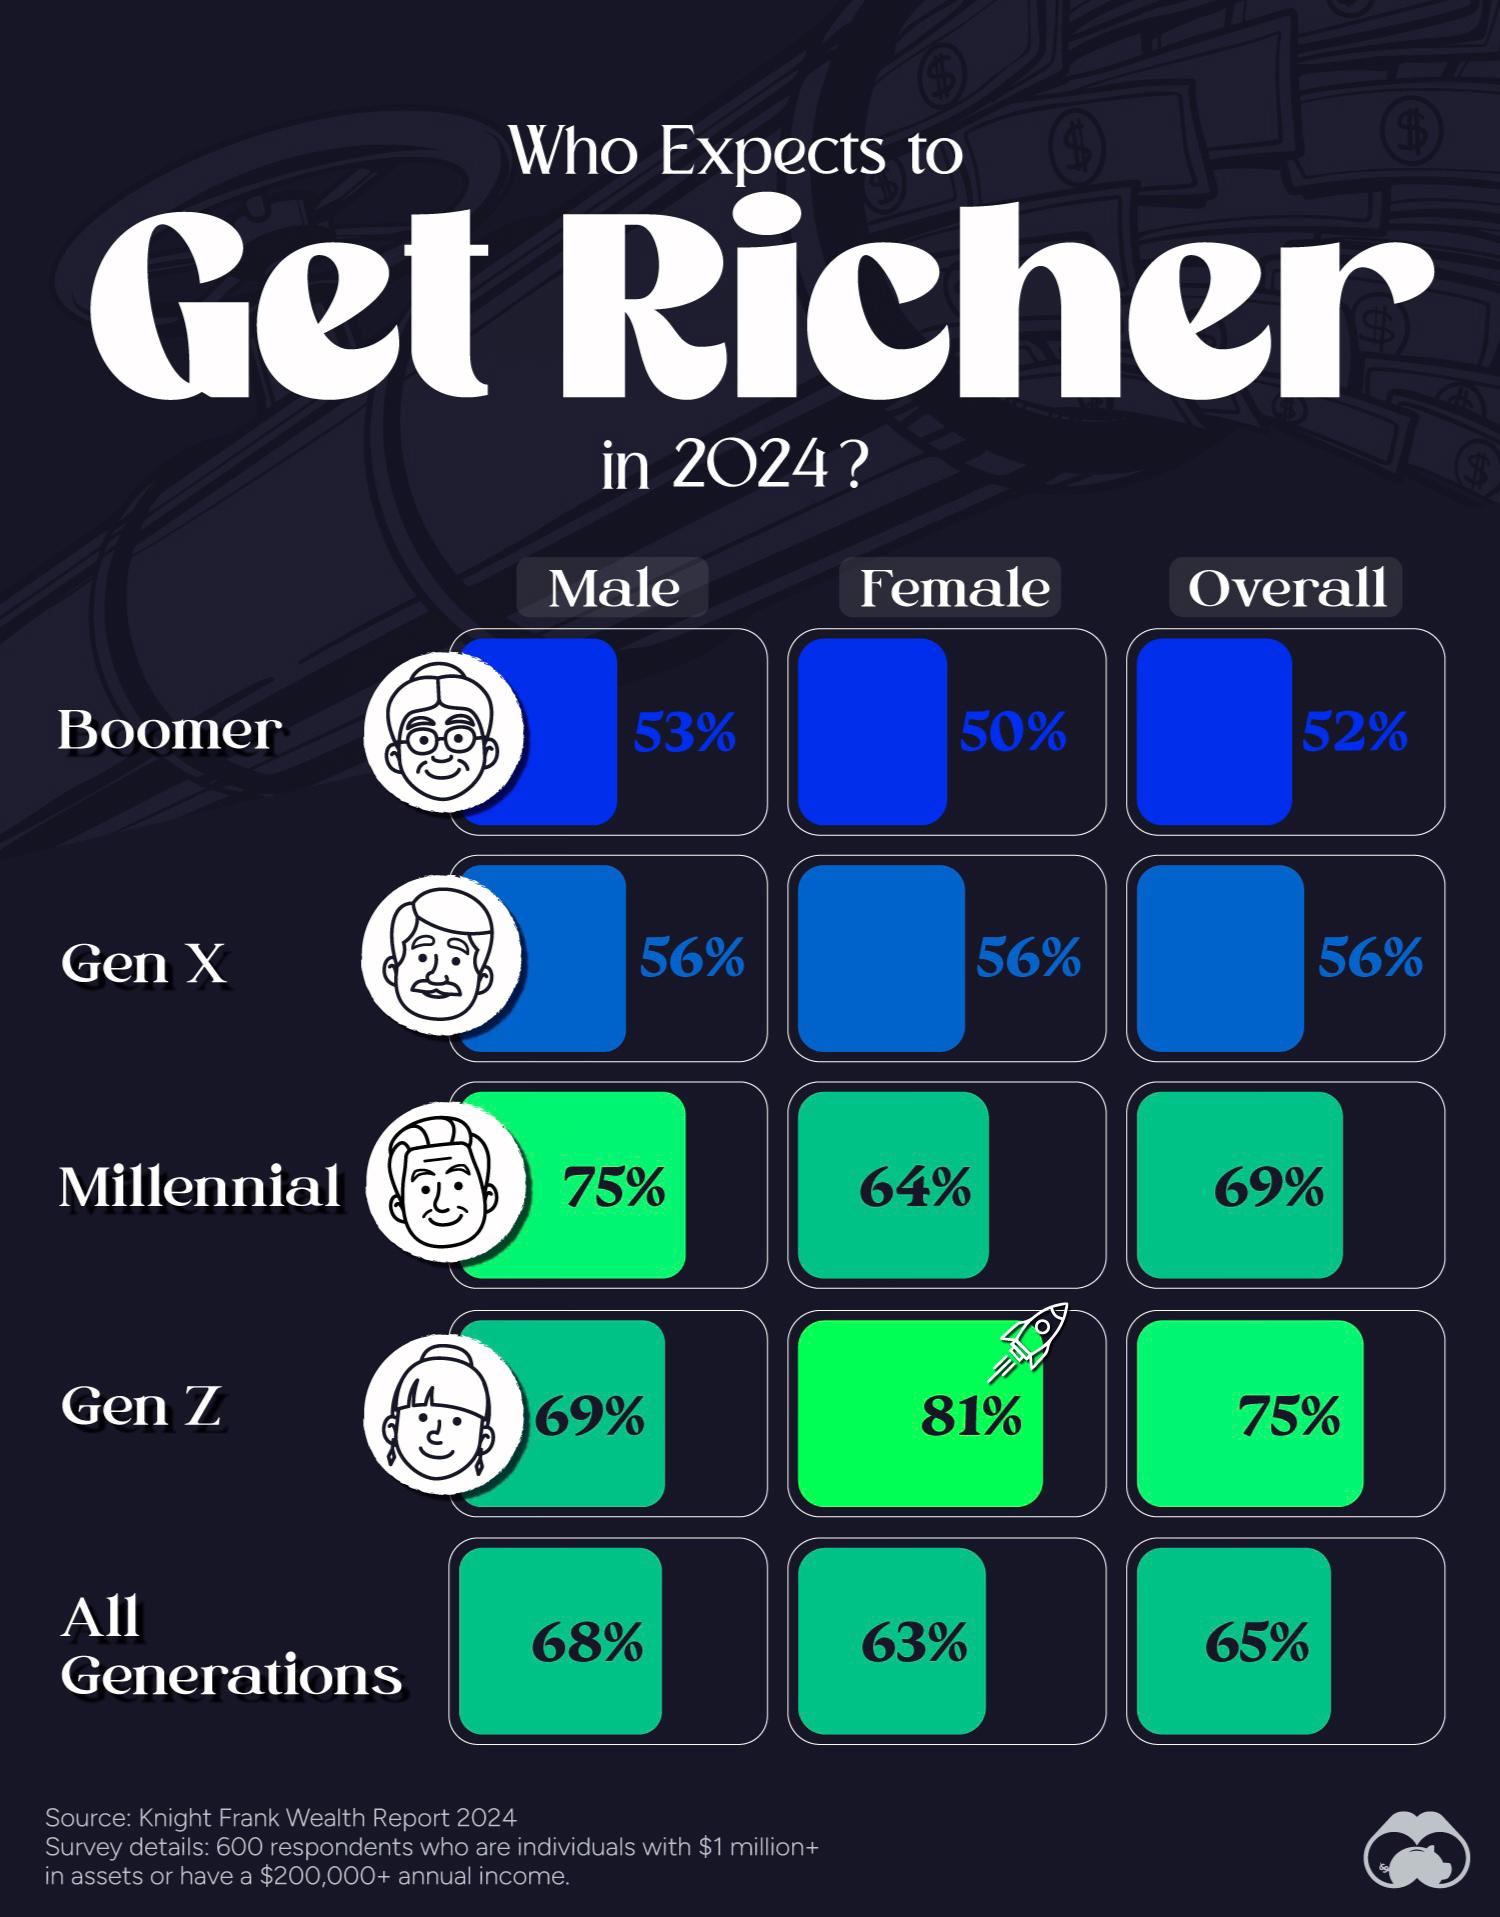 Gen Z Women Are Most Optimistic About Increasing Their Wealth in 2024